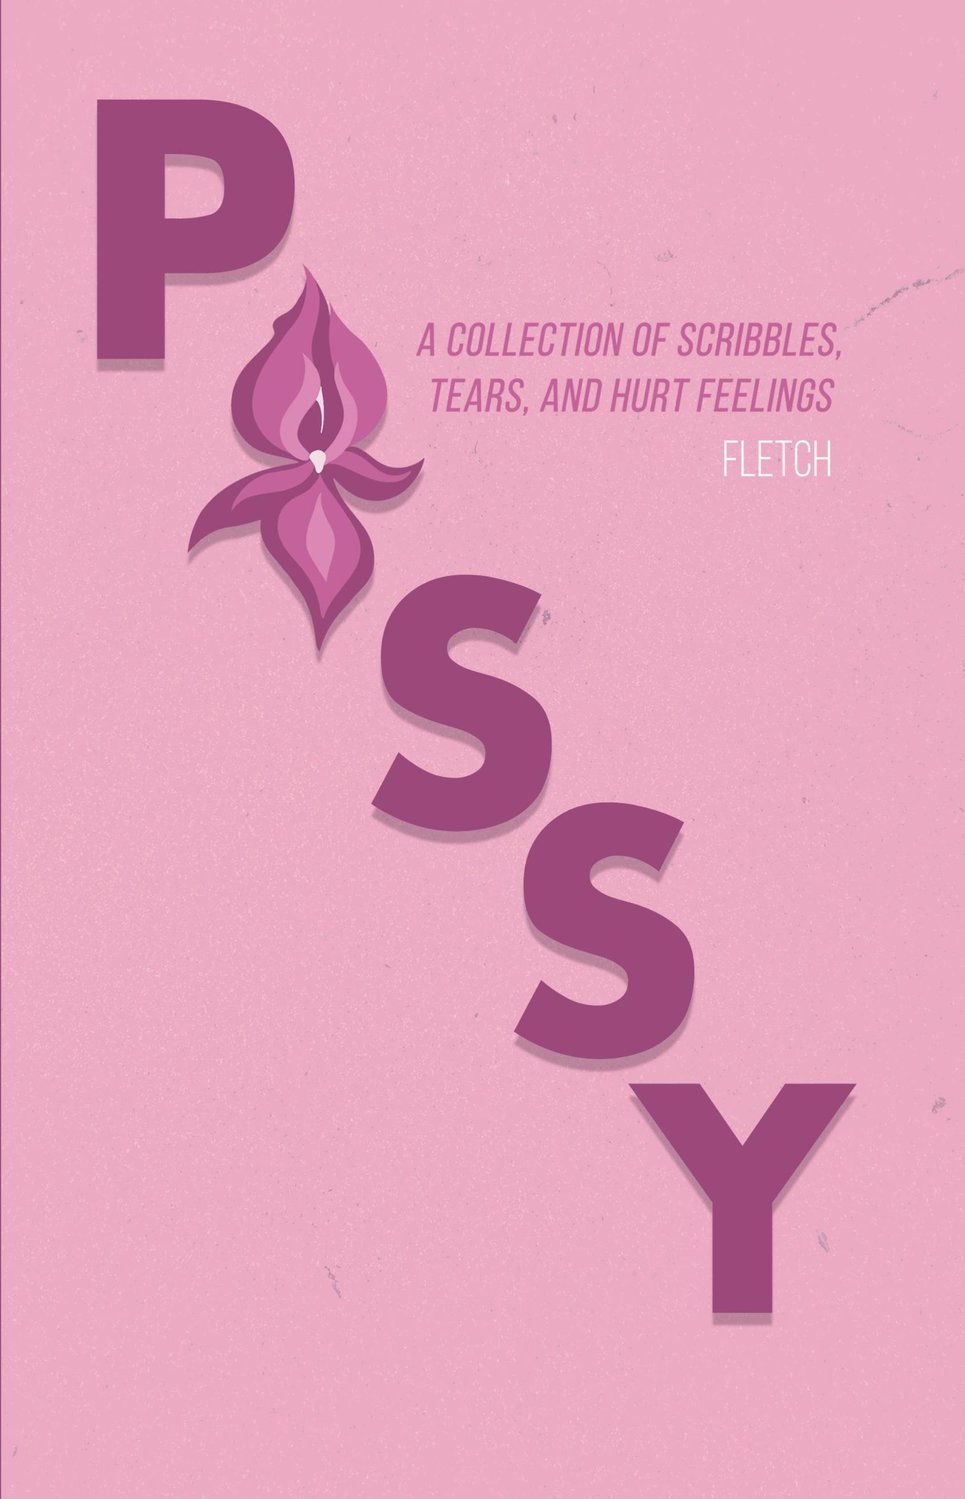 The cover of "Pussy: A Collection of Scribbles, Tears, and Hurt Feelings," written by Fletch, a Canastota-based author.